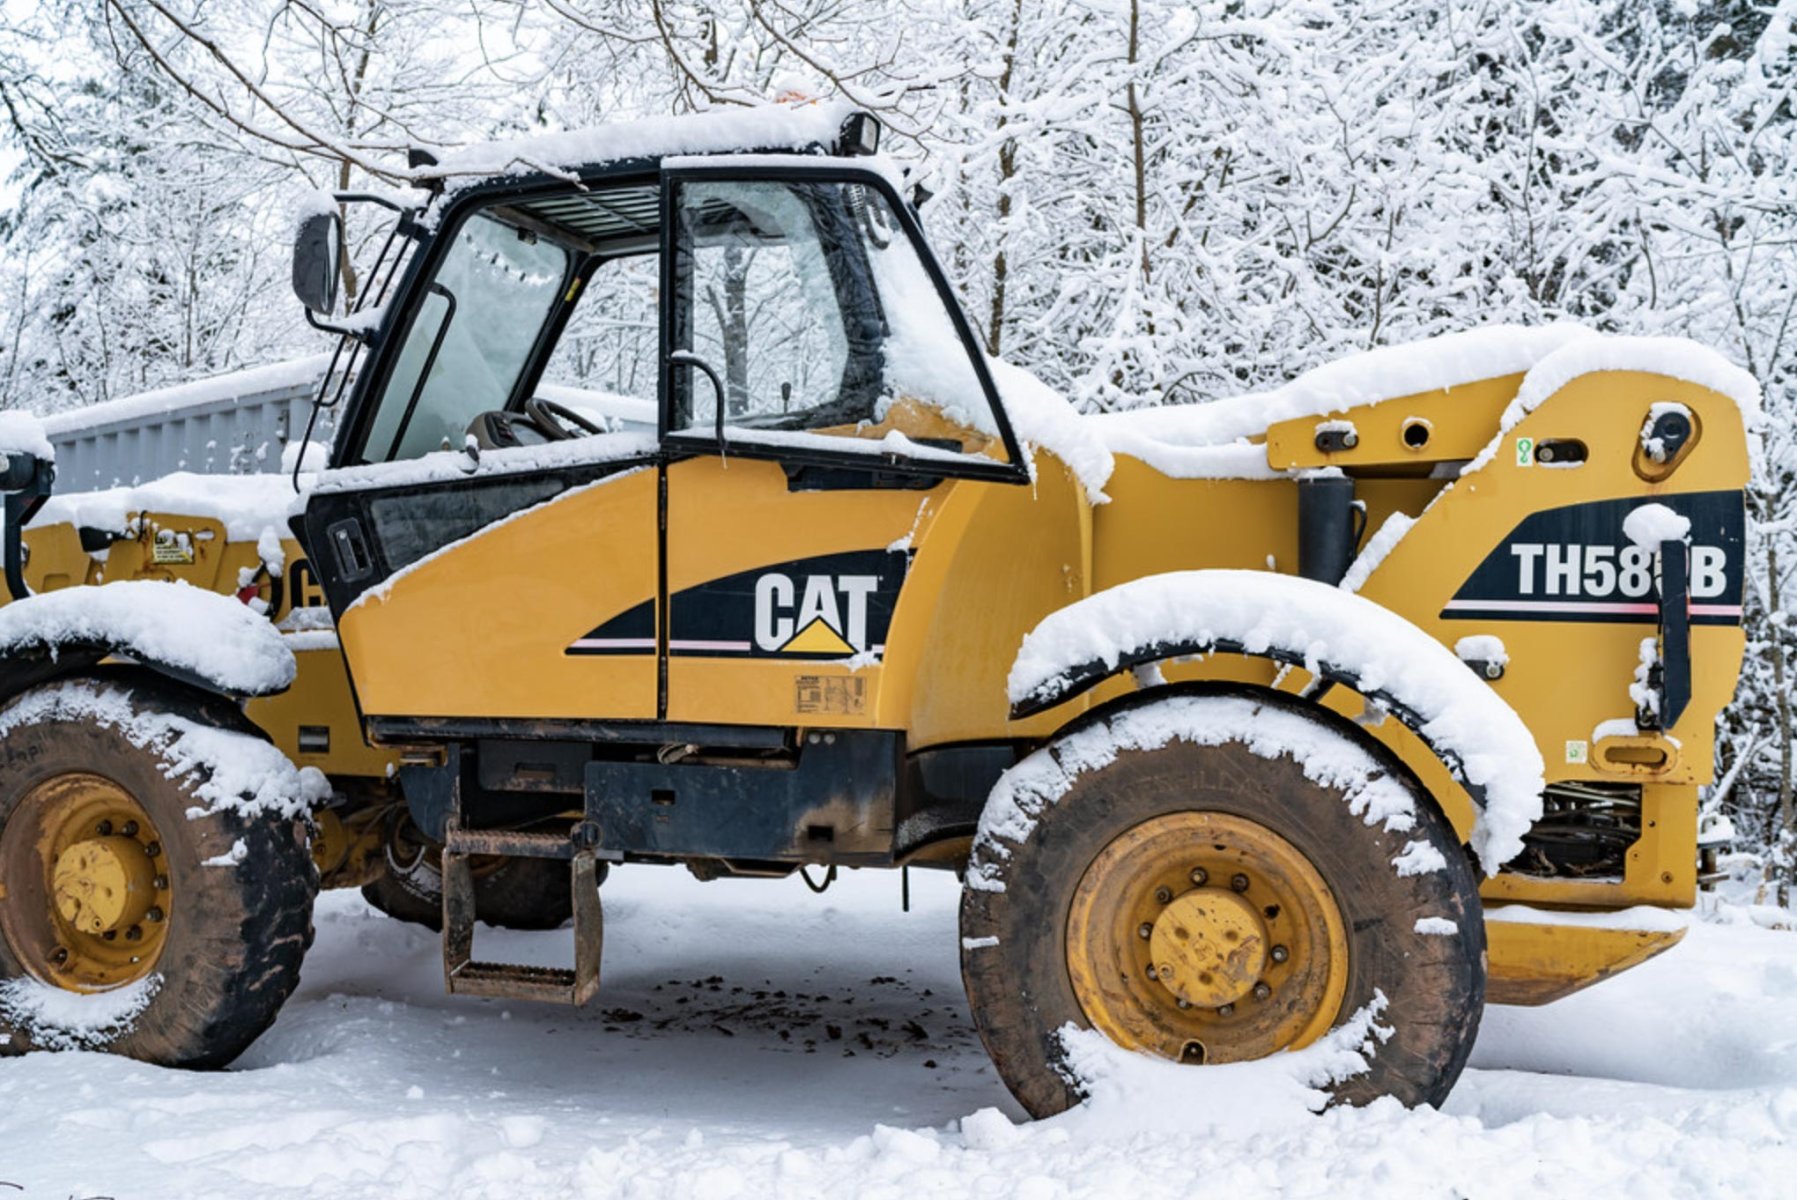 Preparing Tools and Construction Equipment for Winter